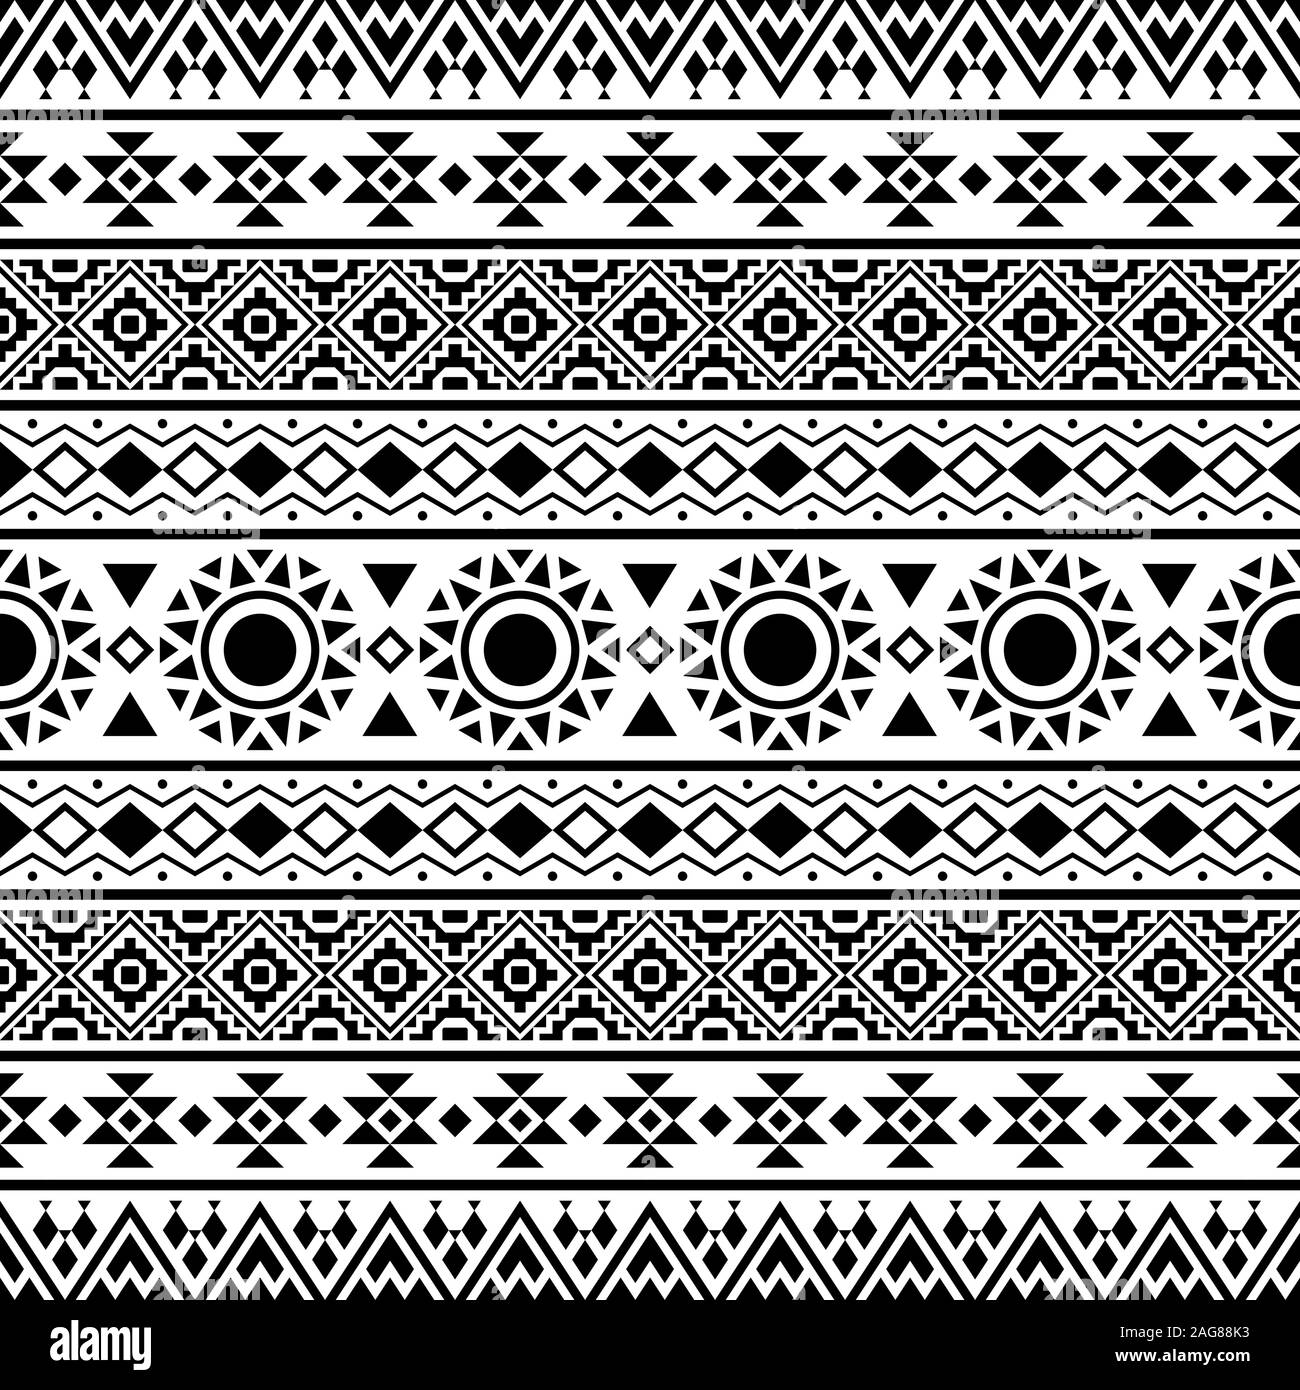 Seamless Etnic Pattern texture background in black and white color. BW ...